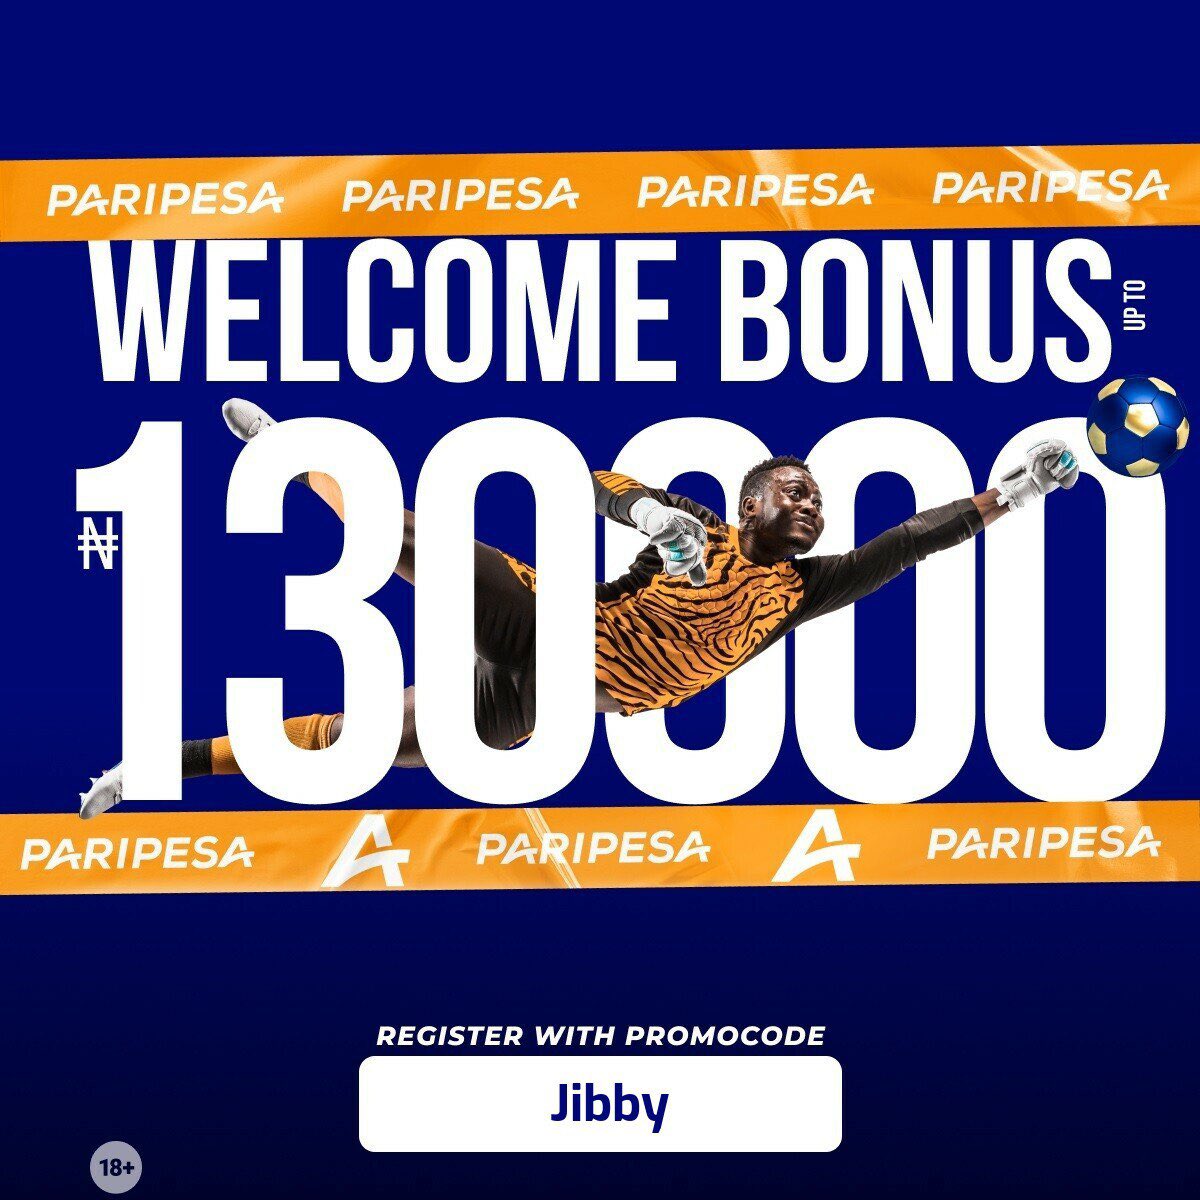 Sign up with Paripesa today and get up to N130,000 welcome bonus on your first deposit - Sign up here: paripesa.bet/jibby - Use my promo code “Jibby” to get the bonus - Fund your account Start winning!!! 💪🏾